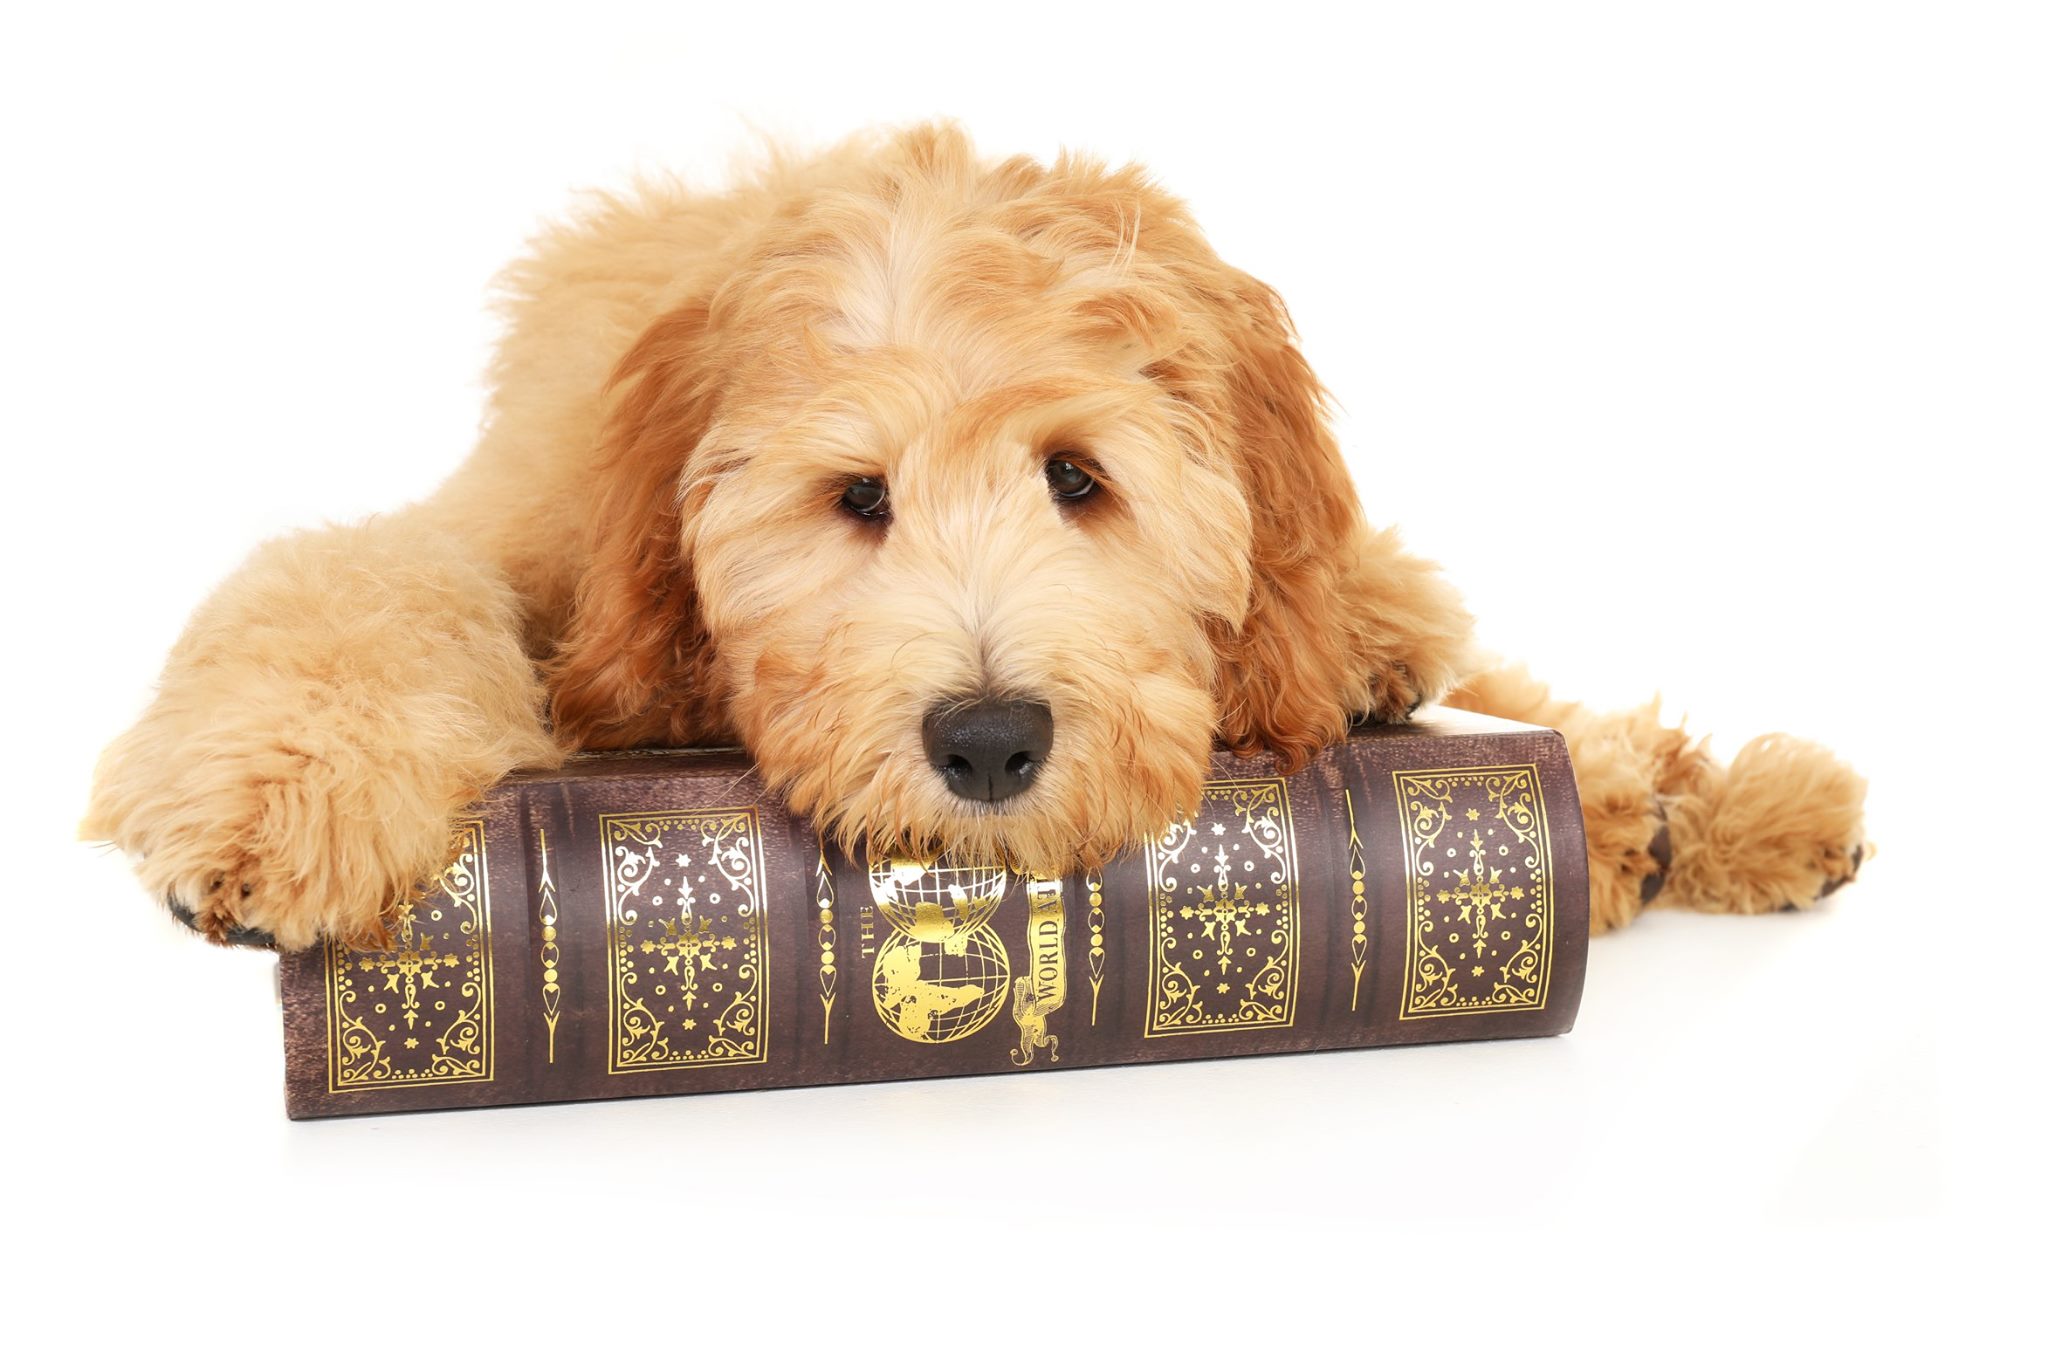 an apricot colored goldendoodle laying on a world atlas book